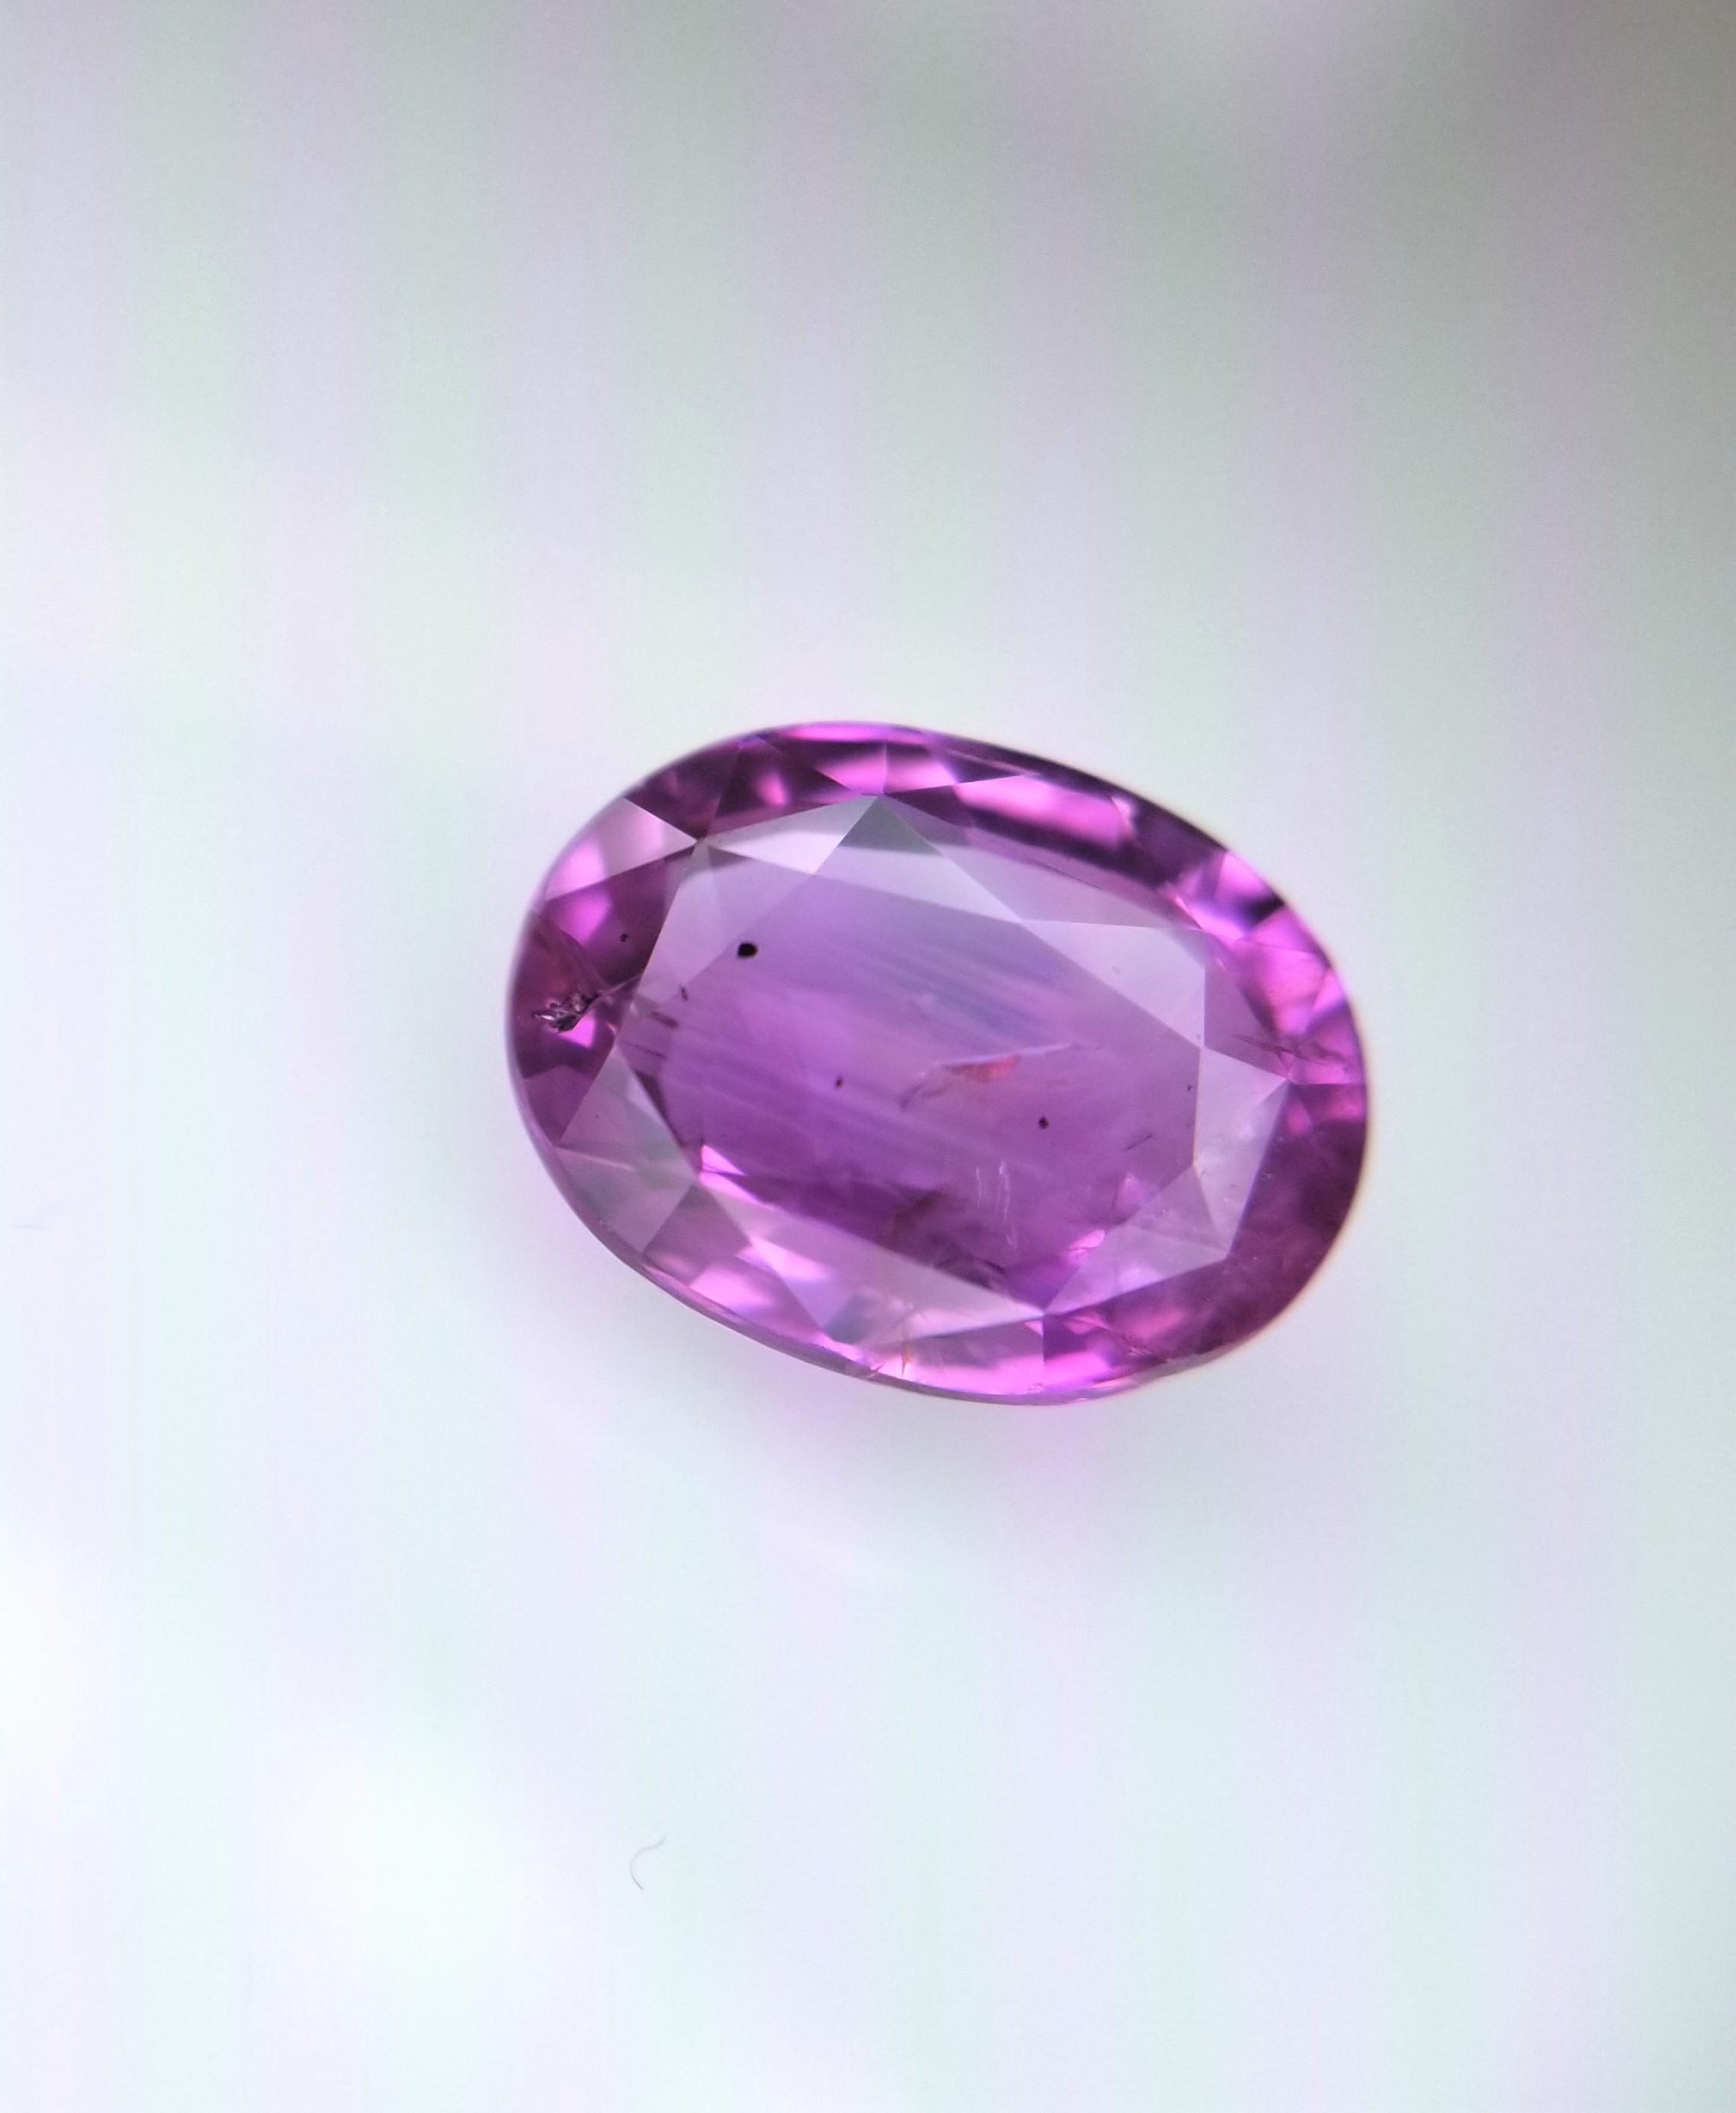 This custom, bezel-set pendant necklace features a gorgeous Berberyn Certified 3.74 Carat Oval Cut Pink sapphire measuring 10.02 X 7.46 mm and can be made in 18K Rose Gold, 18K Yellow Gold or 18K White Gold.
Pink sapphires have been exponentially